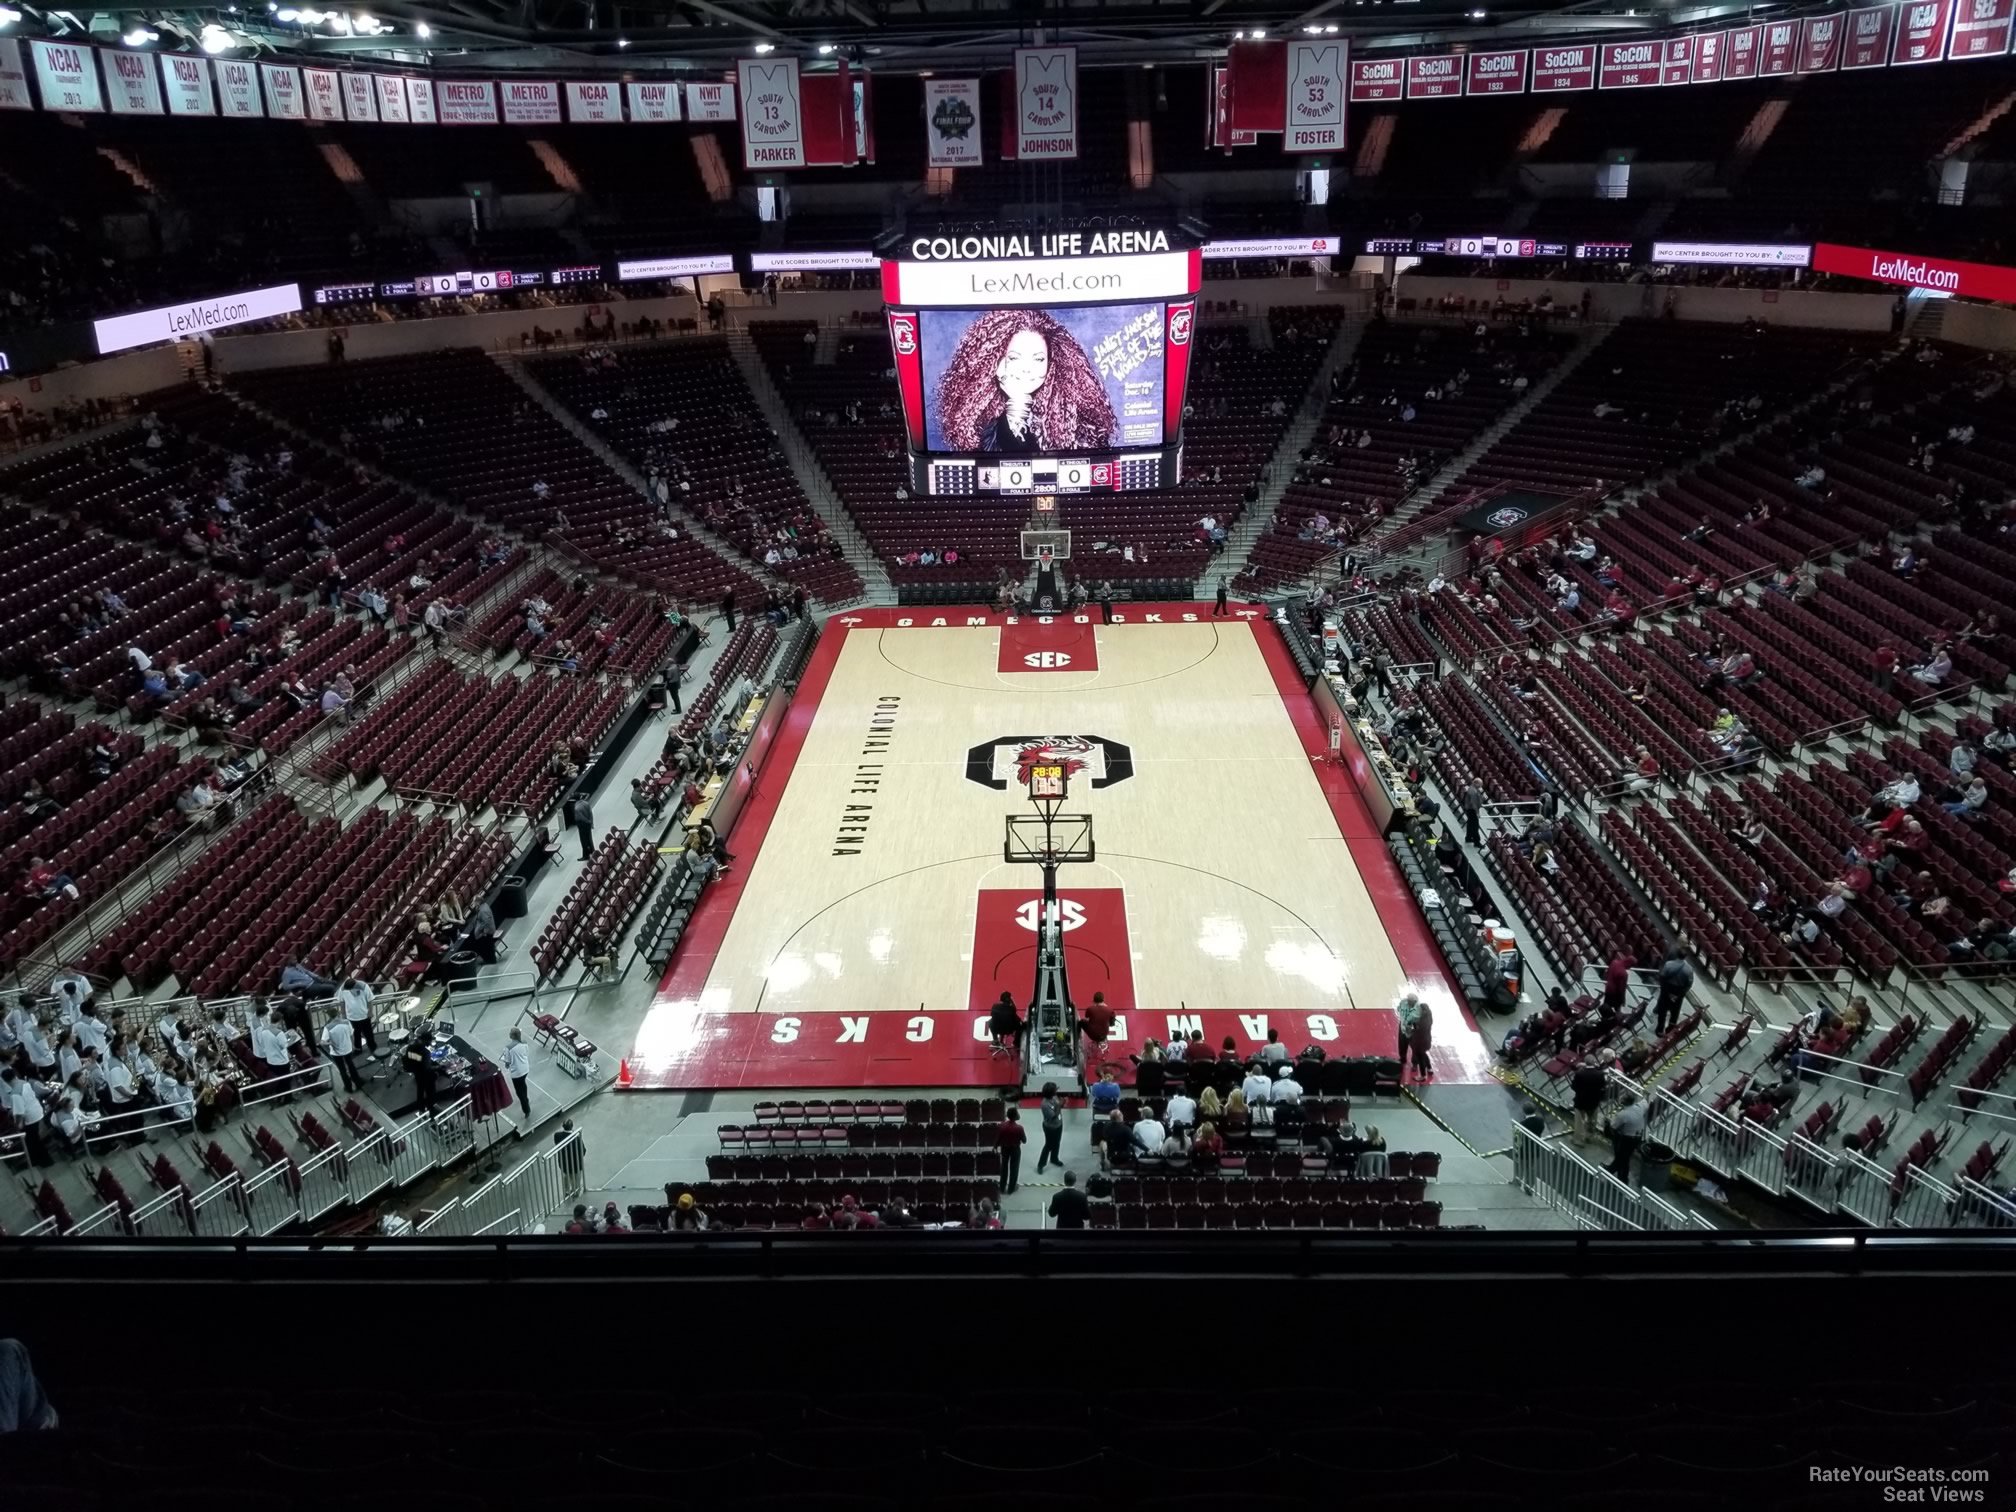 section 215, row 7 seat view  for basketball - colonial life arena